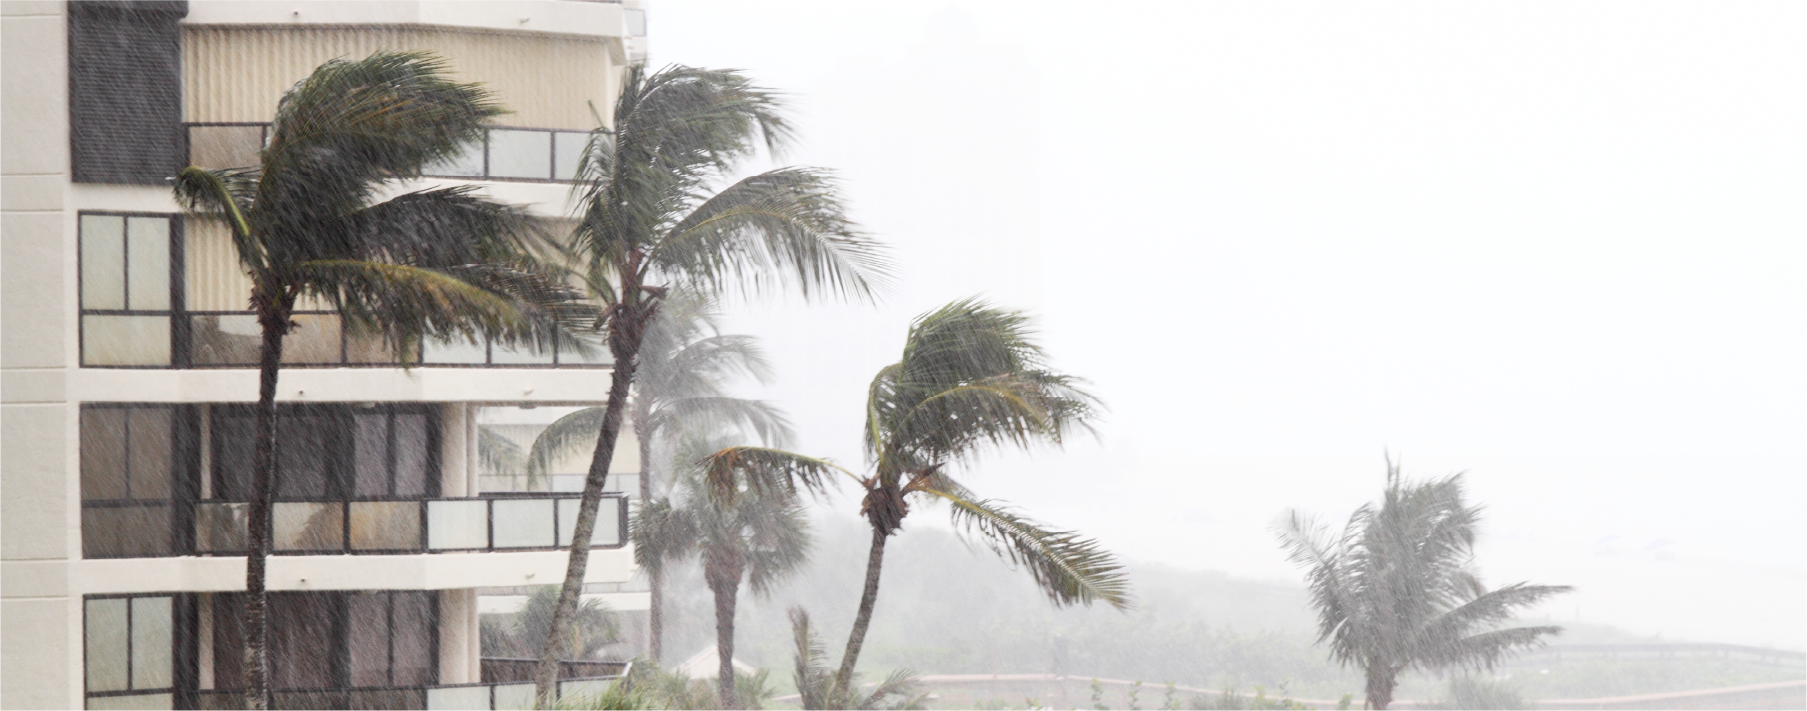 Image of a hotel and palm trees with wind and rain